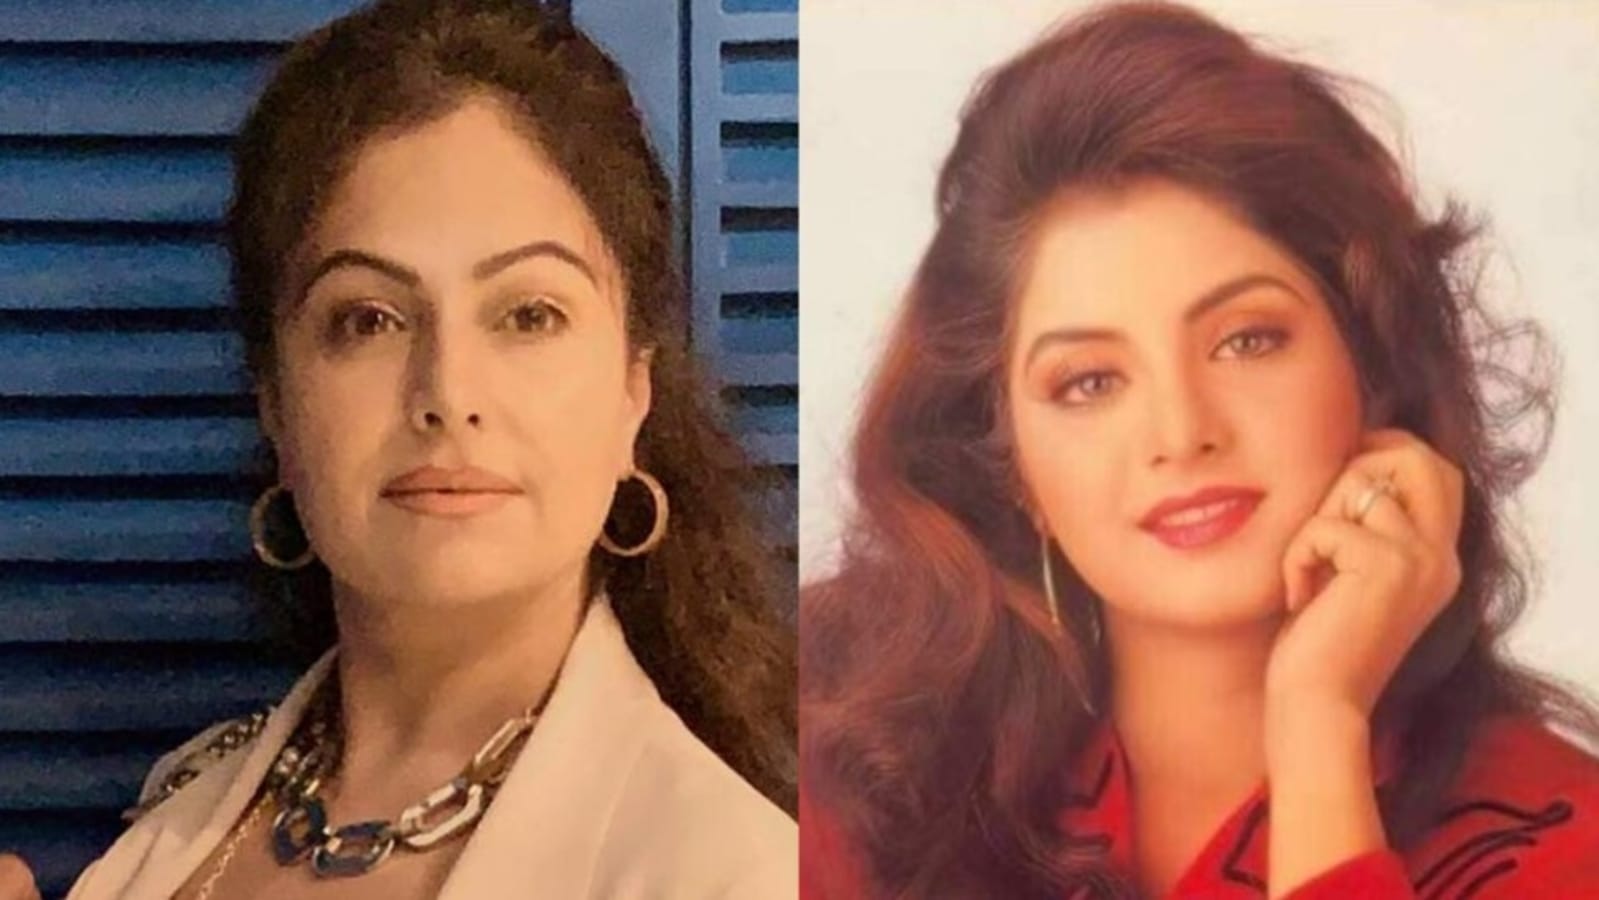 Amrita Shetty Xxx - Ayesha Jhulka cried while dubbing for her, Divya Bharti's film after her  death | Bollywood - Hindustan Times